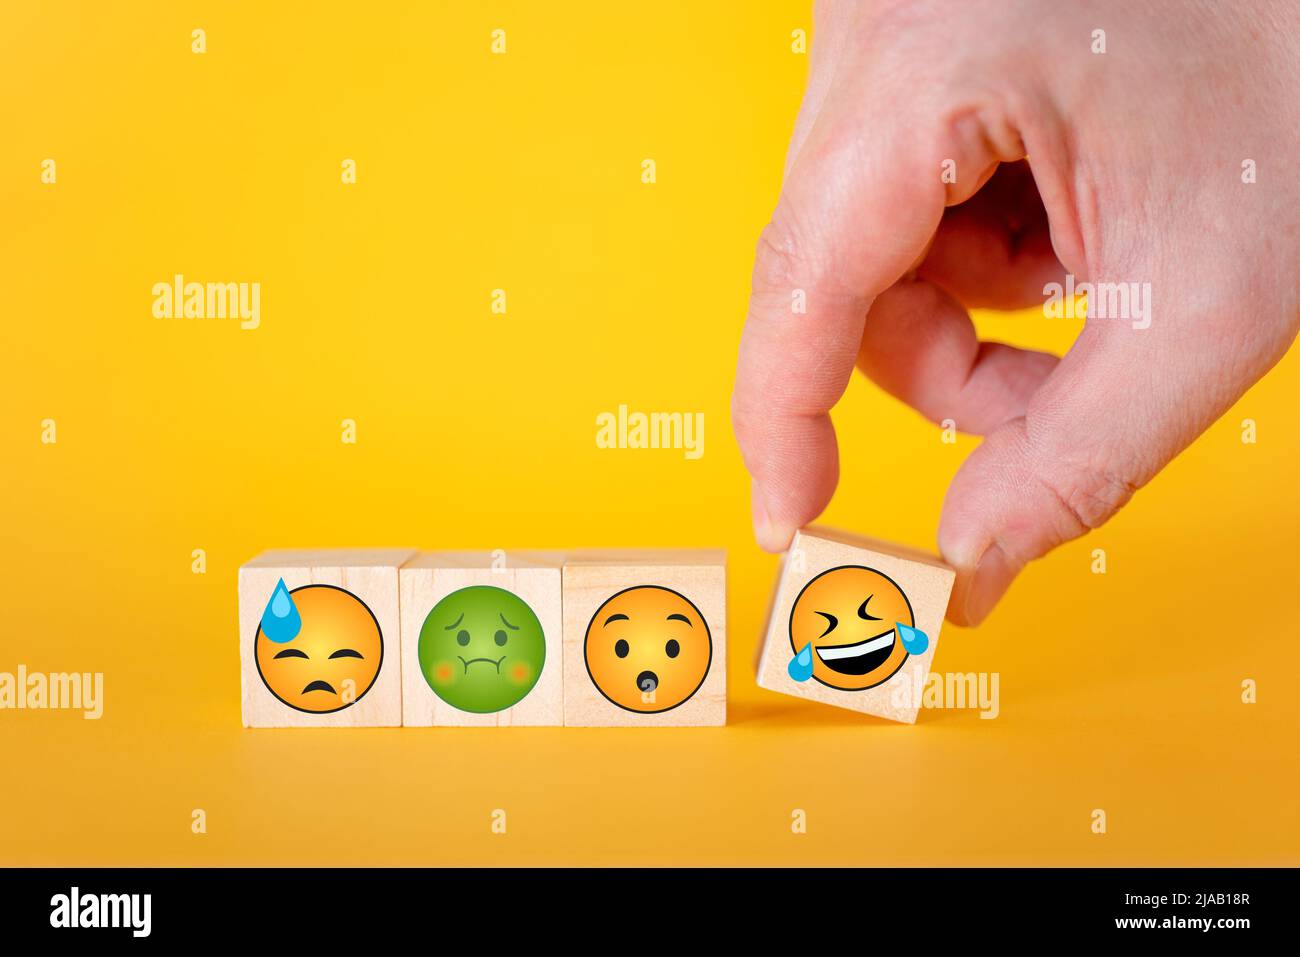 Emoji emoticons on a yellow background, the hand takes one cube with a smiley emoji. The concept of the world day of emoticons. Stock Photo